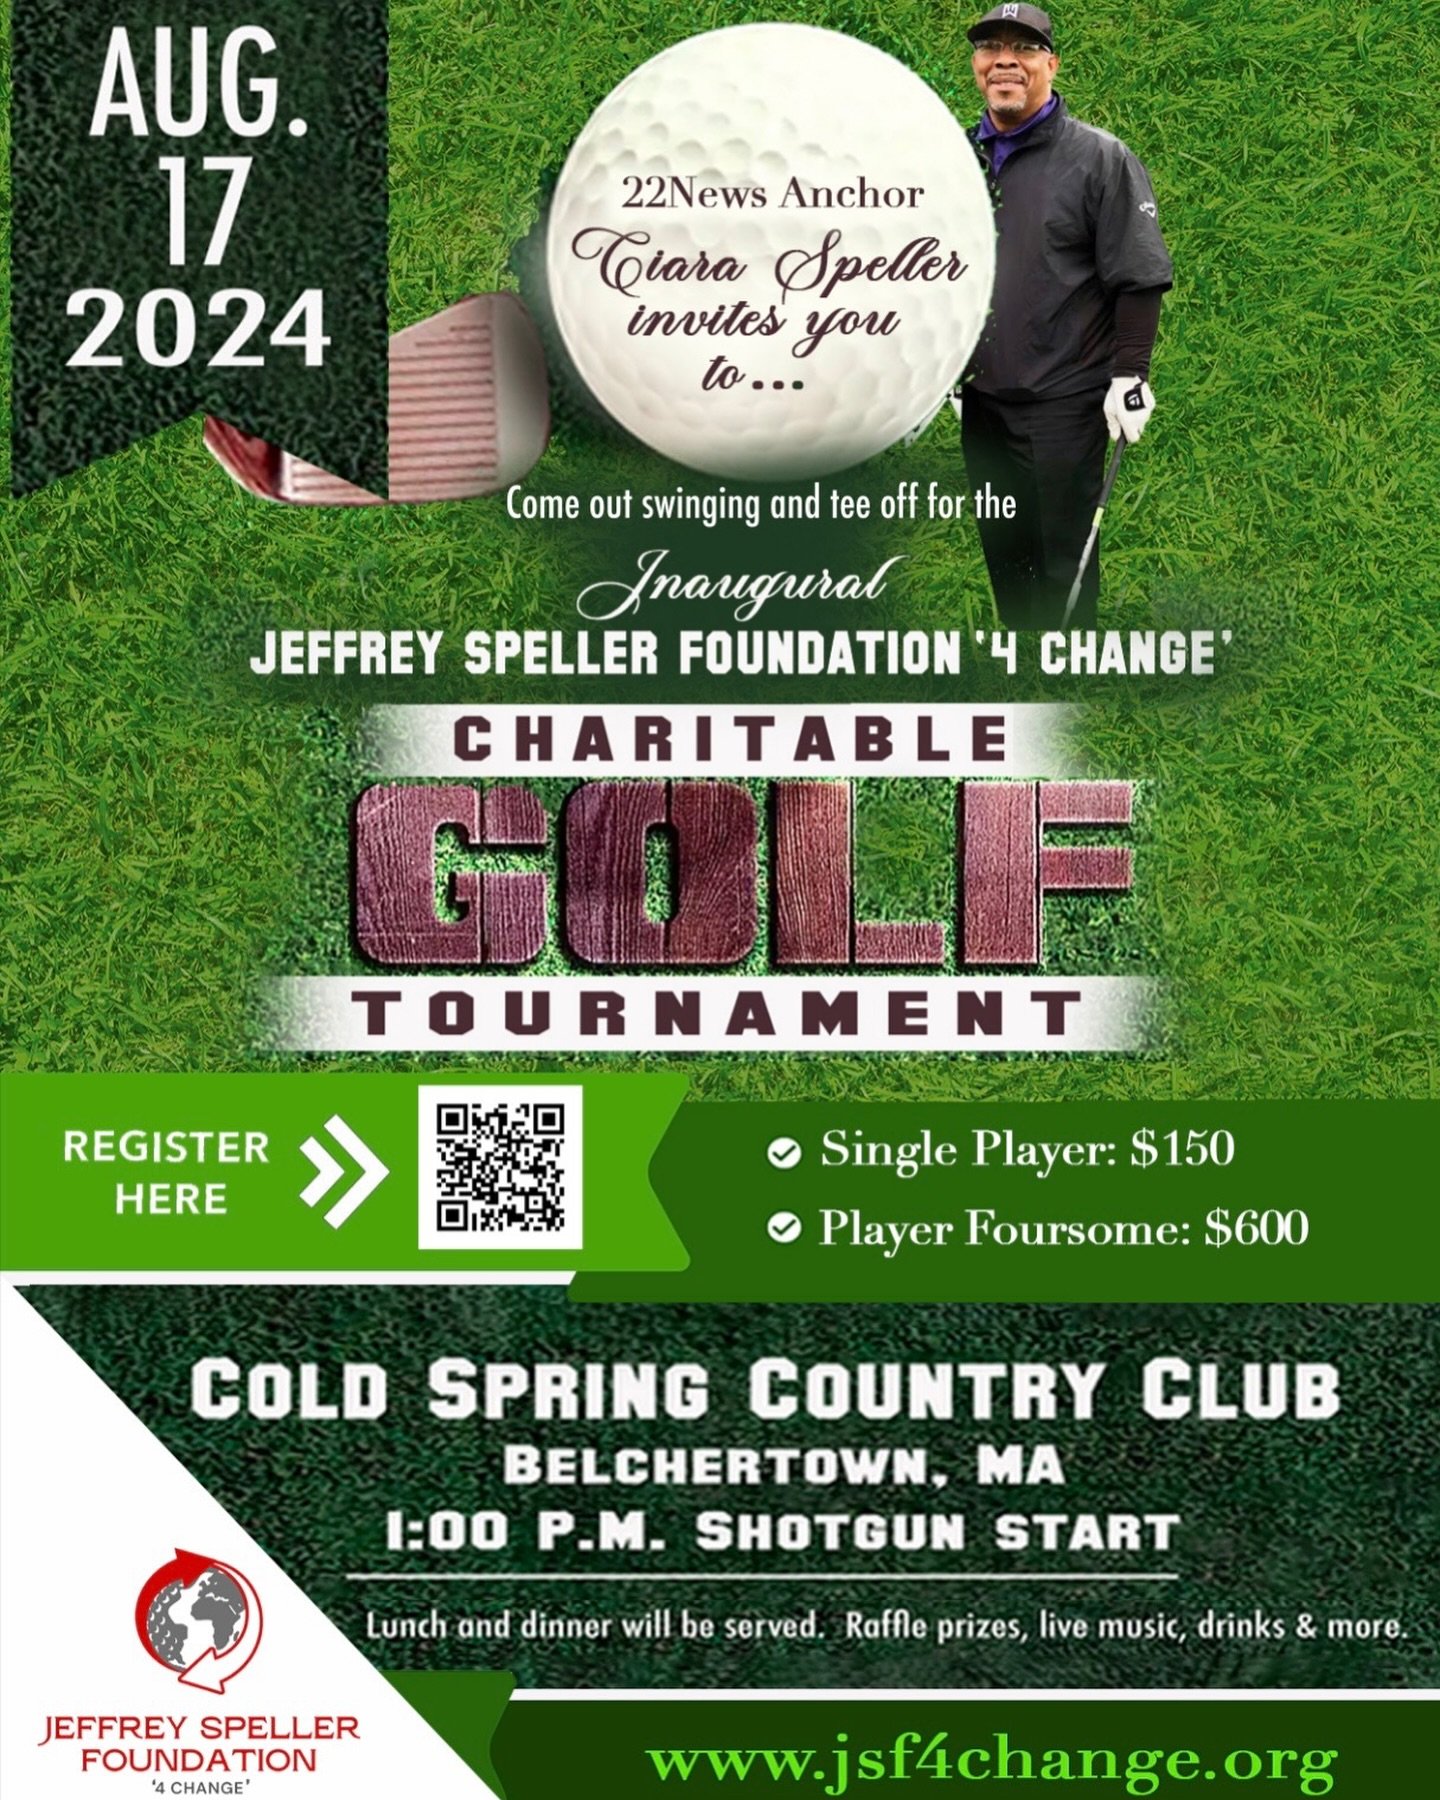 Join me and my friend @ciaraspellernews for The Inaugural Jeffrey Speller Foundation &lsquo;4 Change&rsquo;  Golf Tournament on Saturday, August 17, 2024.
Help us celebrate her dad Jeff, an amazing man gone too soon. 
Link in the bio to register and/